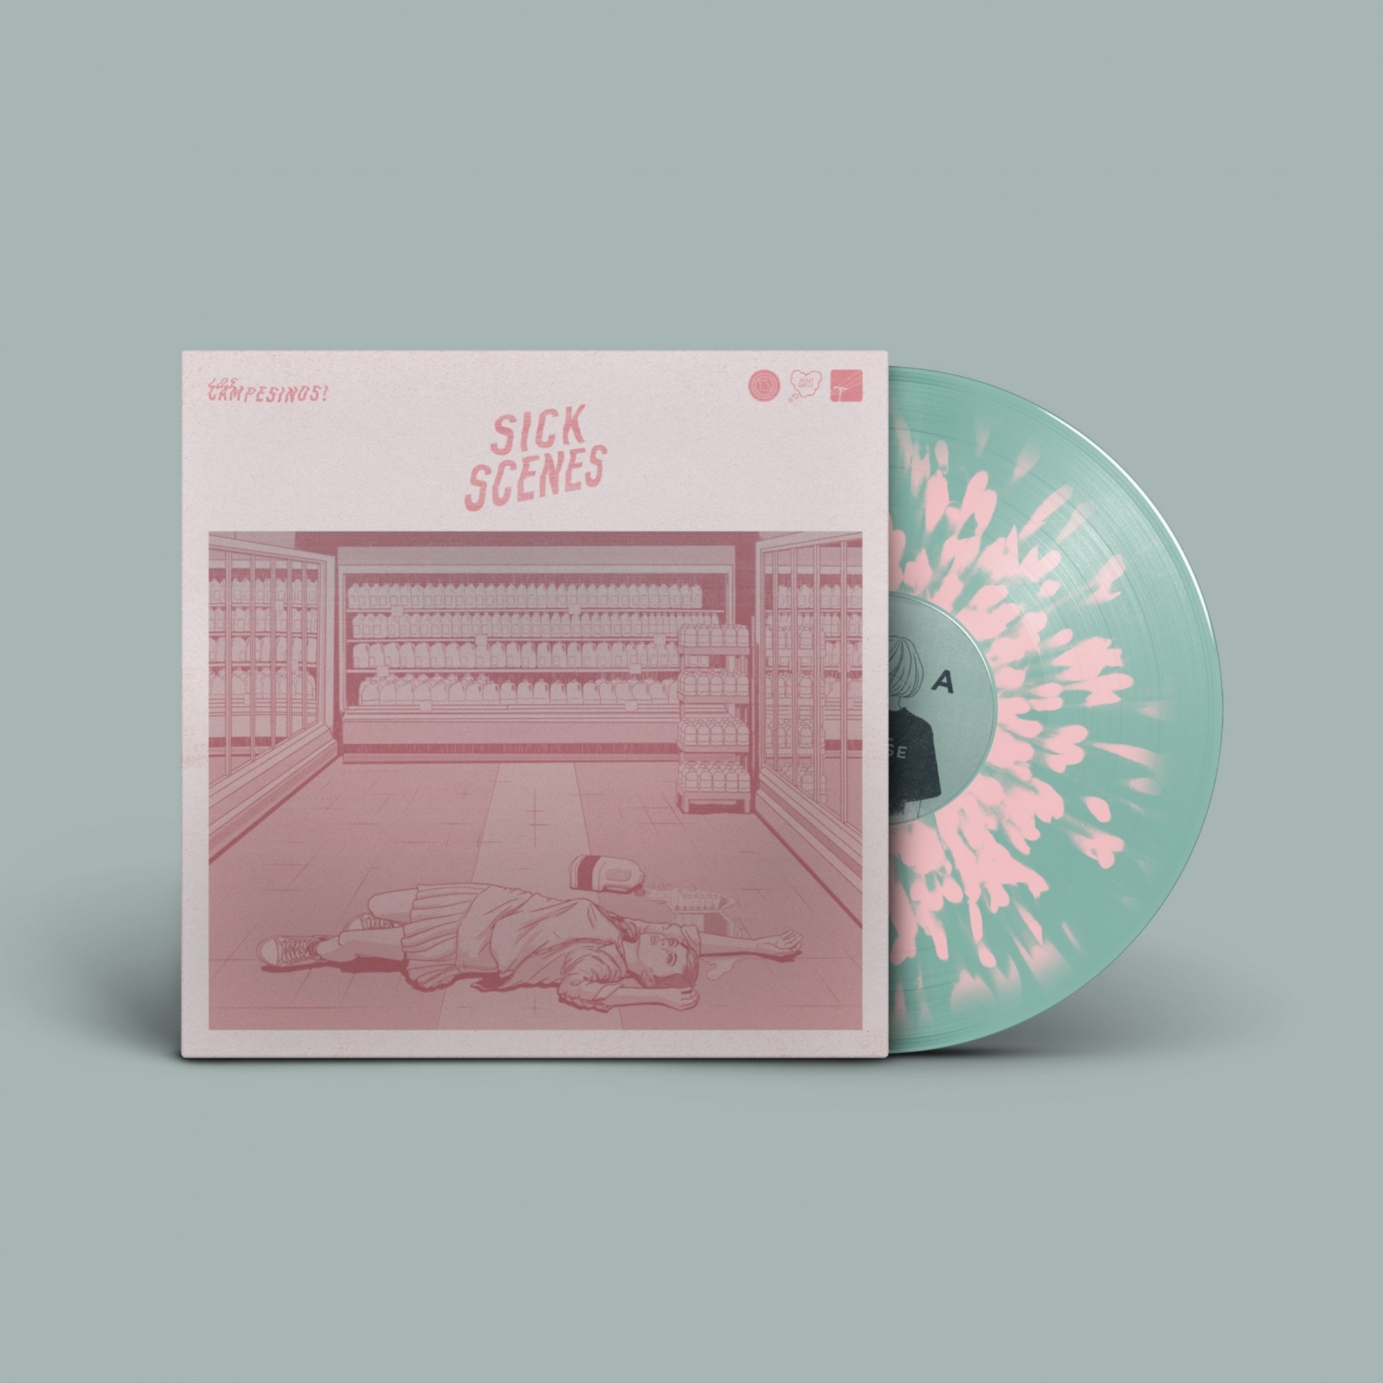 Artwork for Los Campesinos! by R-Corp